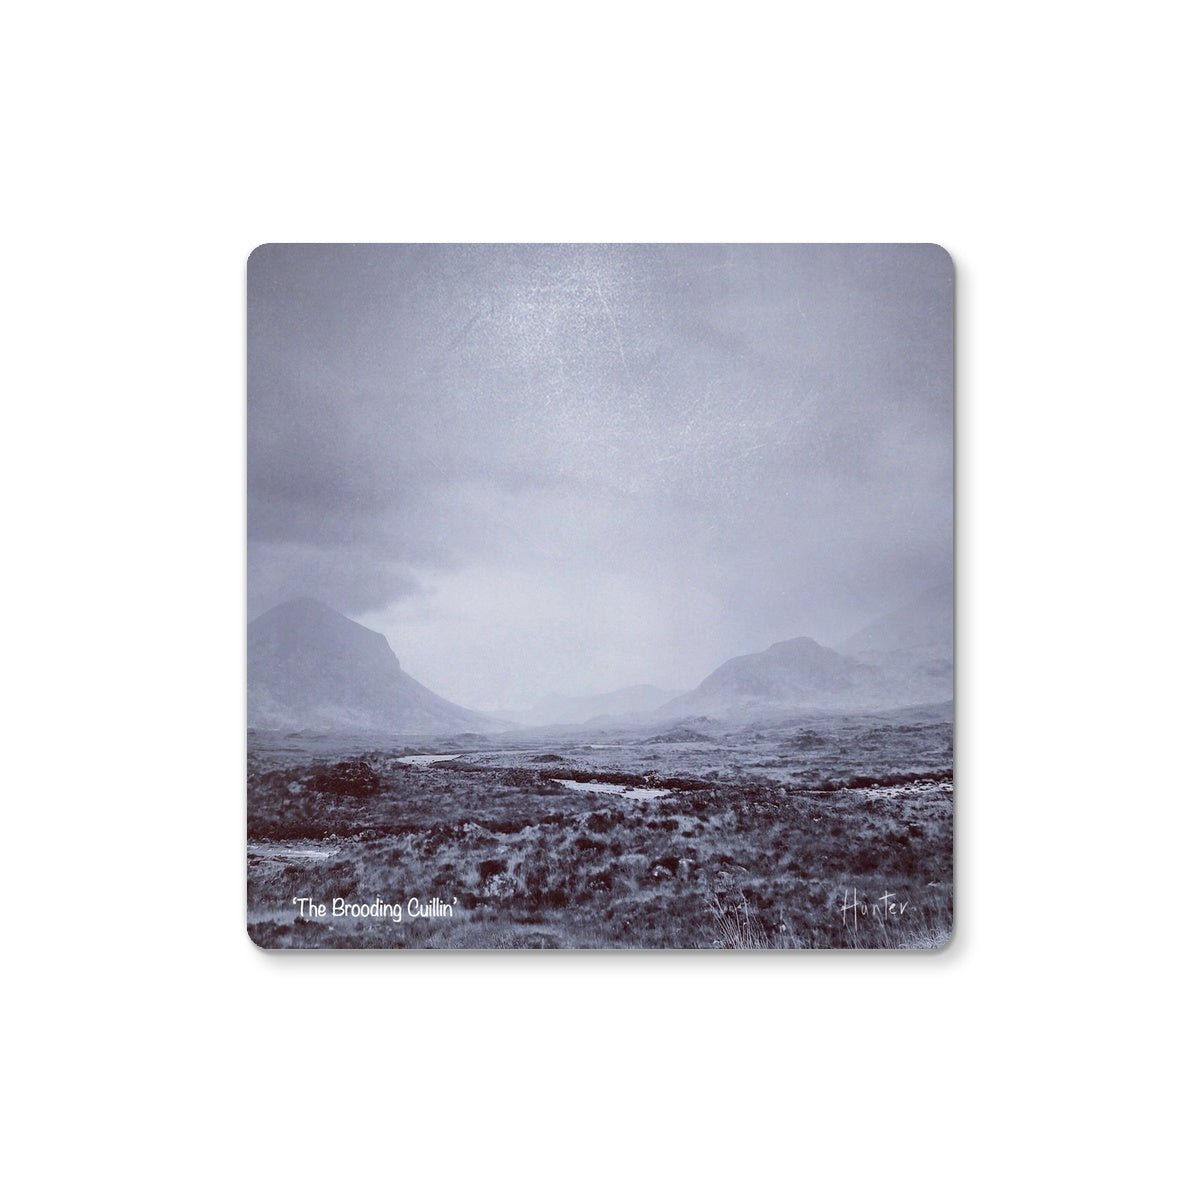 The Brooding Cuillin Skye Art Gifts Coaster-Coasters-Skye Art Gallery-4 Coasters-Paintings, Prints, Homeware, Art Gifts From Scotland By Scottish Artist Kevin Hunter